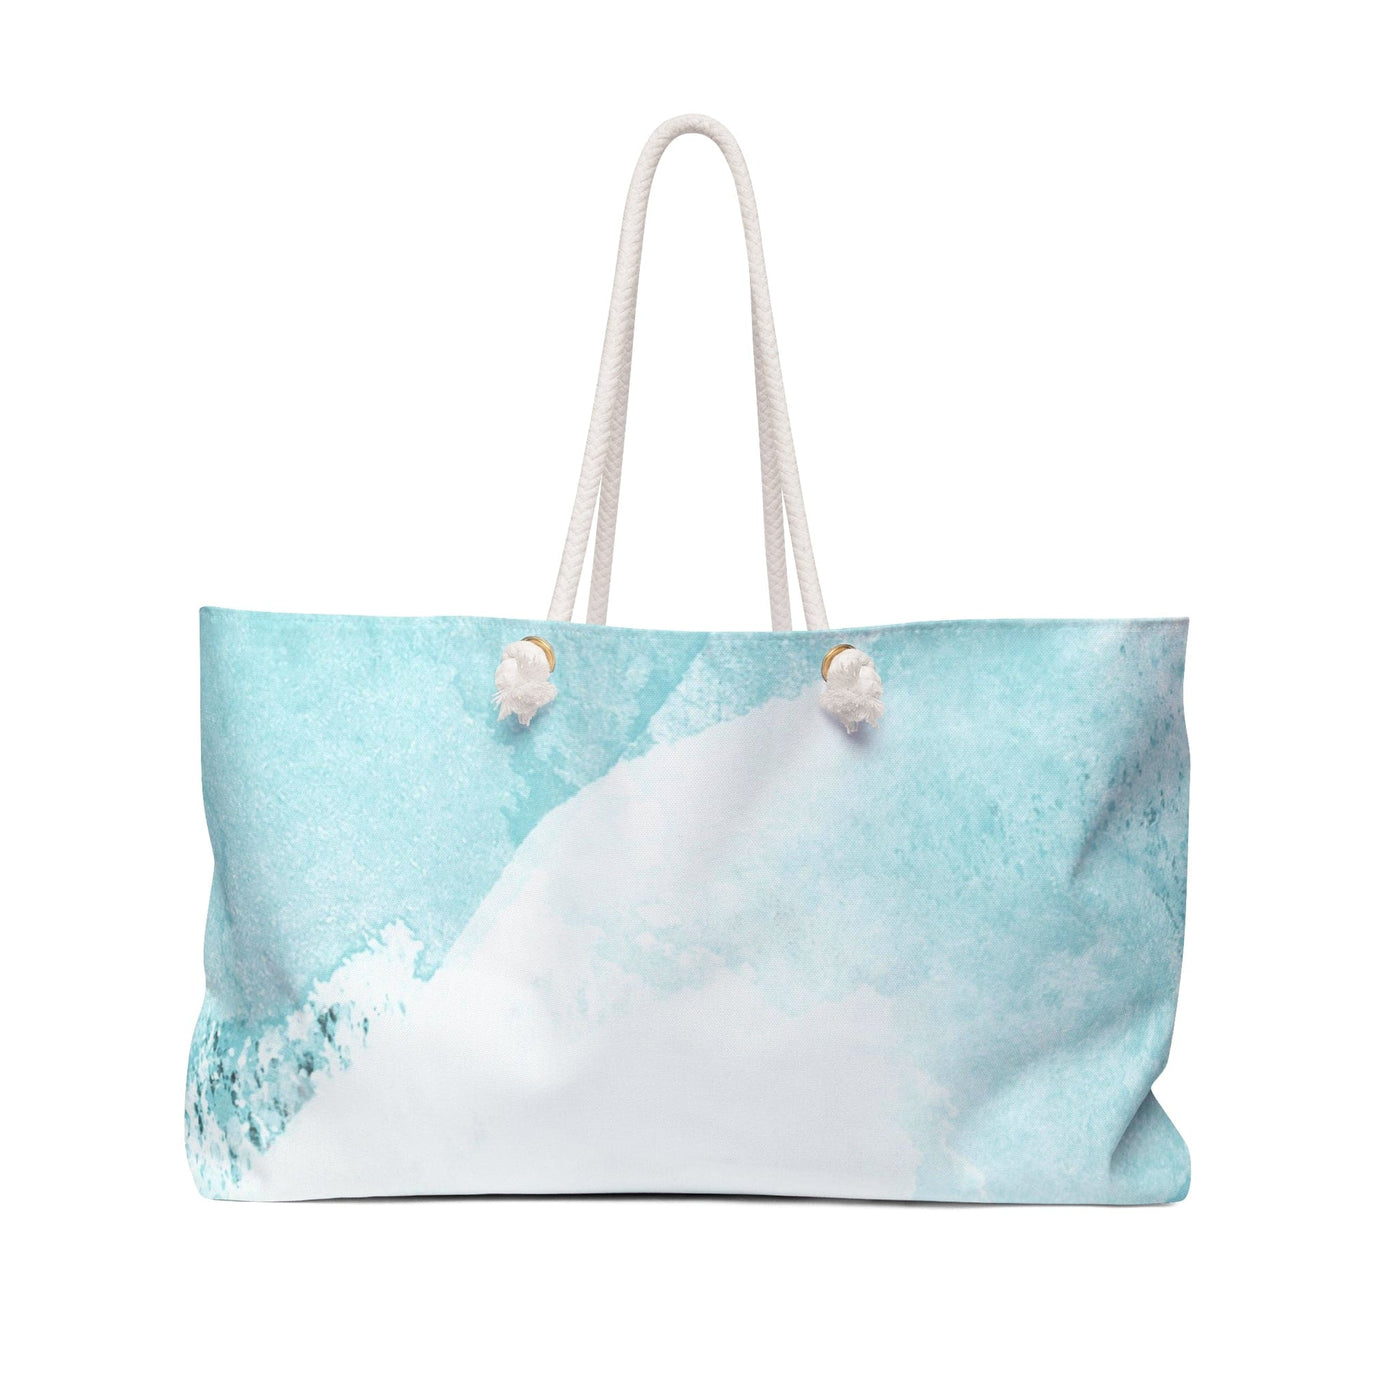 Weekender Tote Bag Subtle Abstract Ocean Blue And White Print - Bags